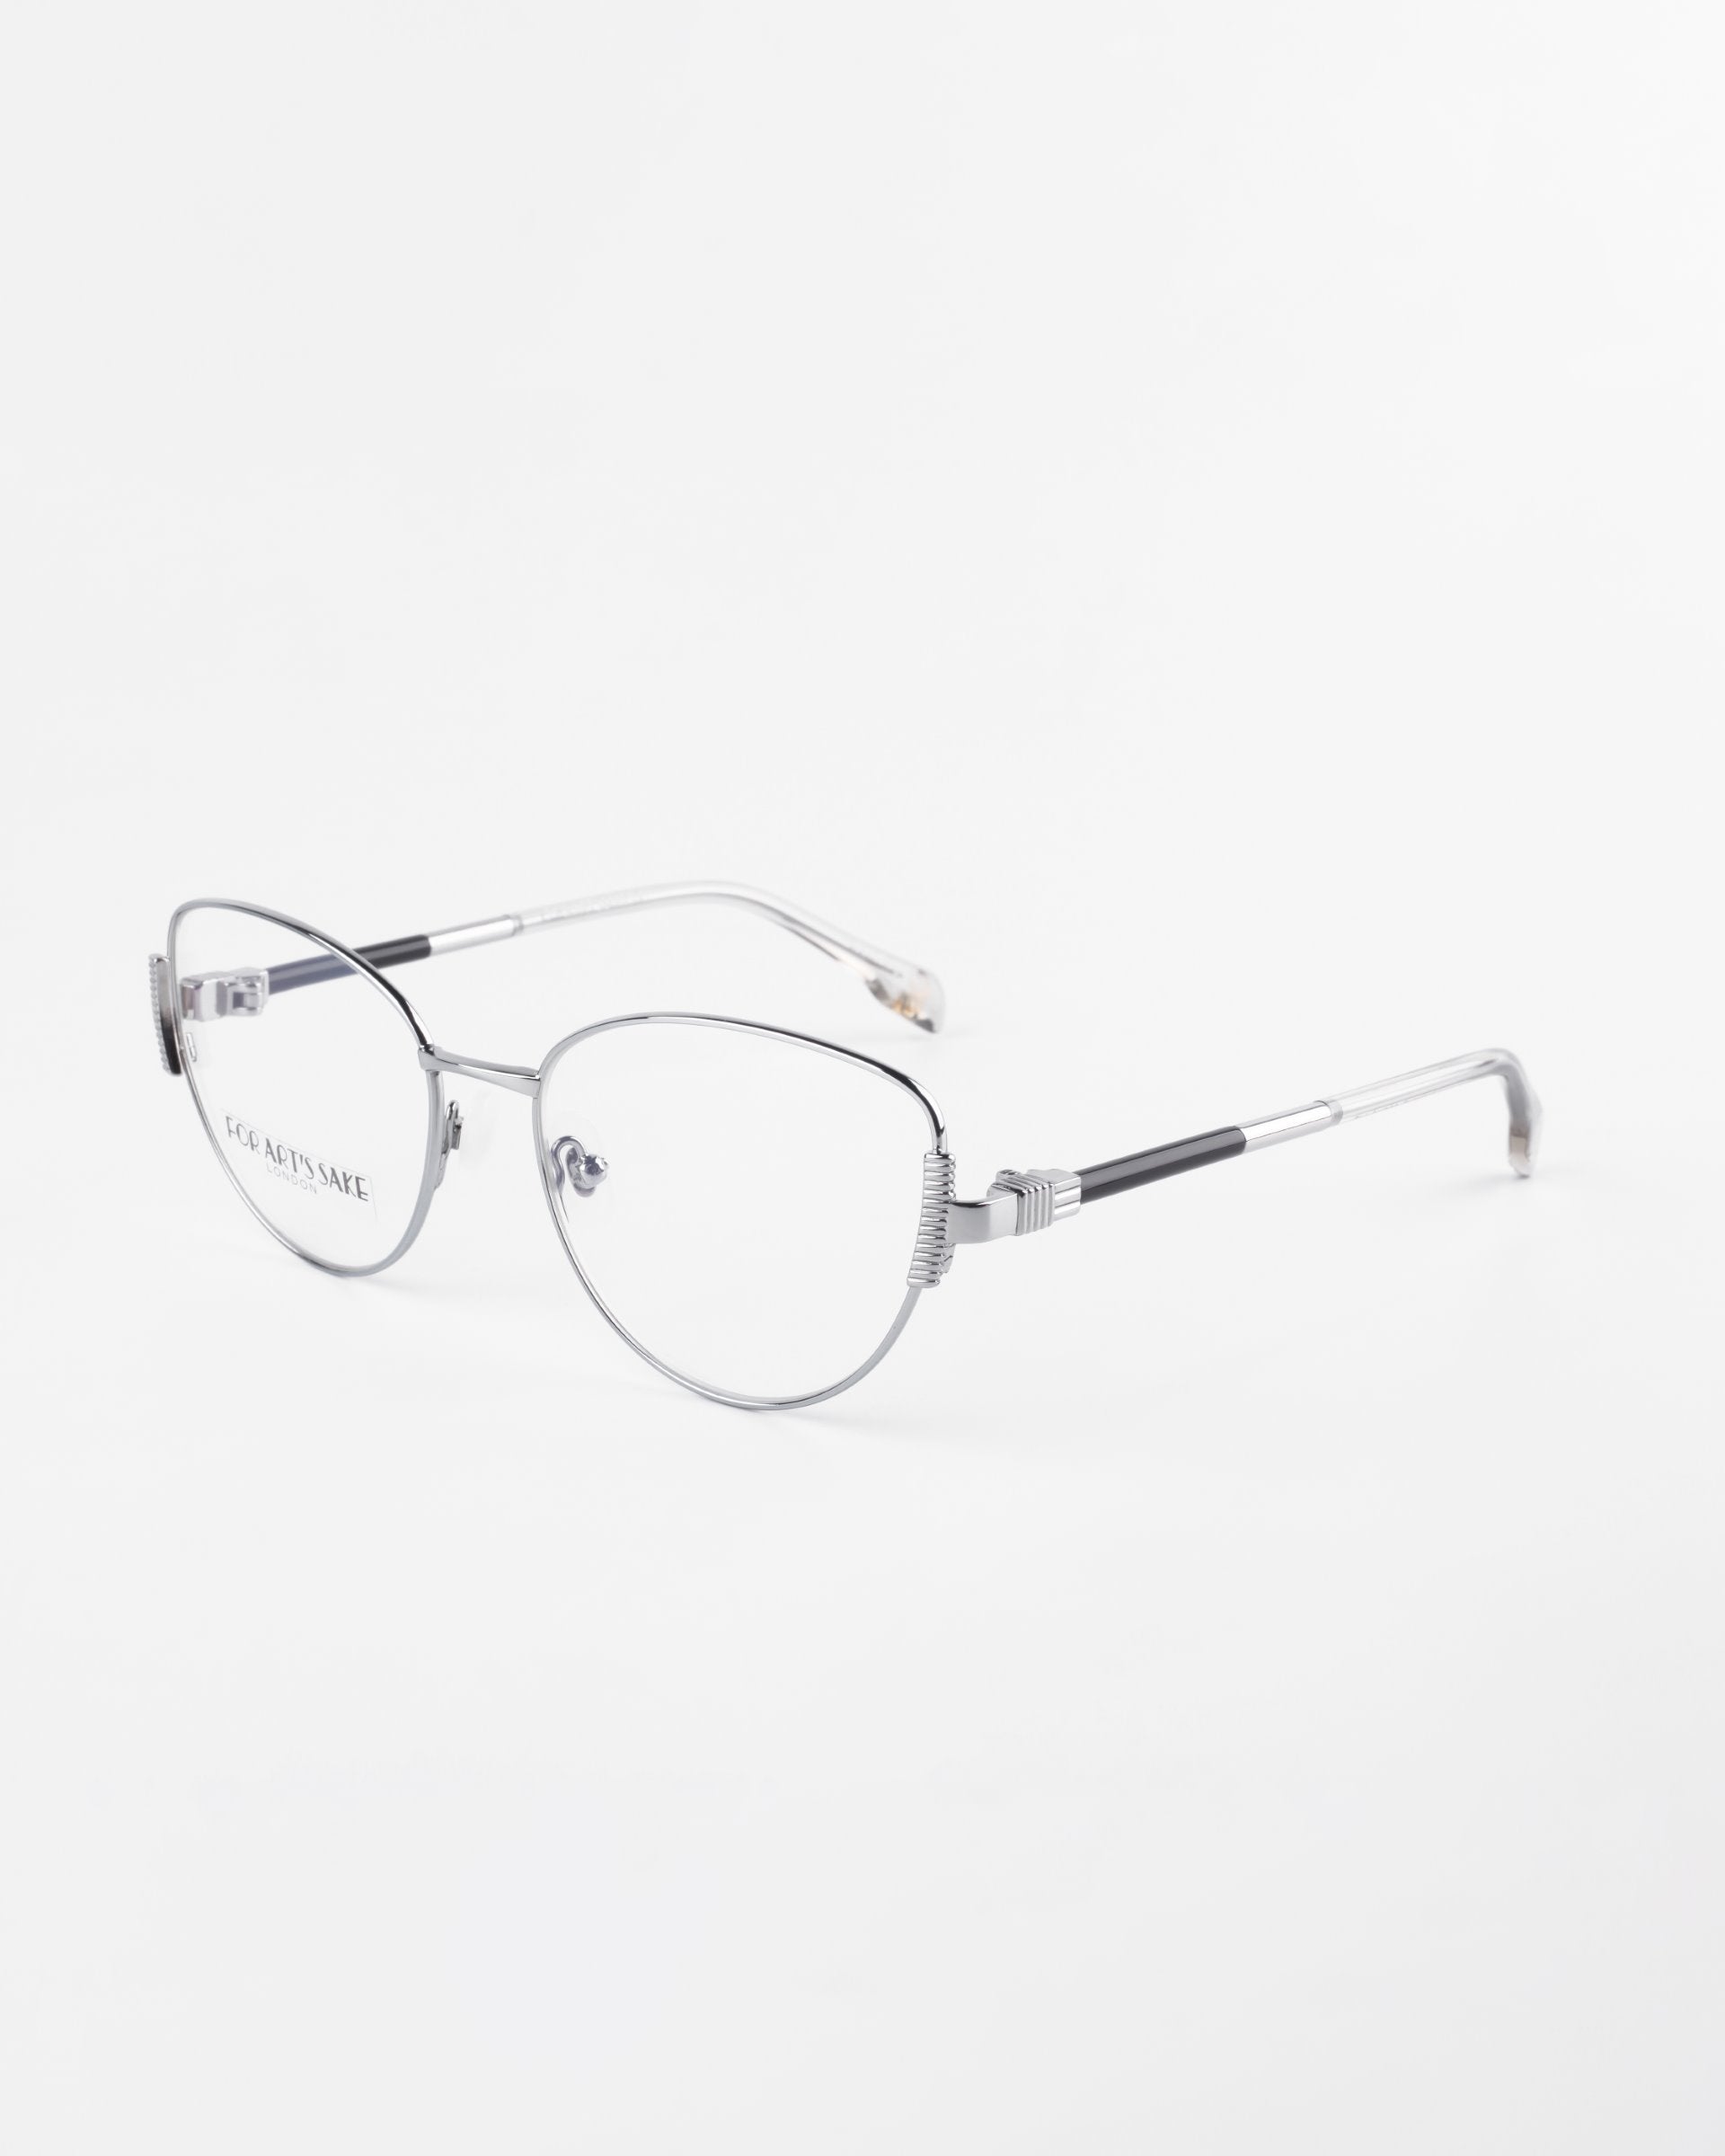 Image of a pair of For Art&#39;s Sake® Dante eyeglasses with thin, silver metal frames. The temples feature a subtle black accent near the hinges. The clear prescription lenses have a modern and minimalist style. These glasses also include jade stone nose pads for added comfort. The background is plain white.